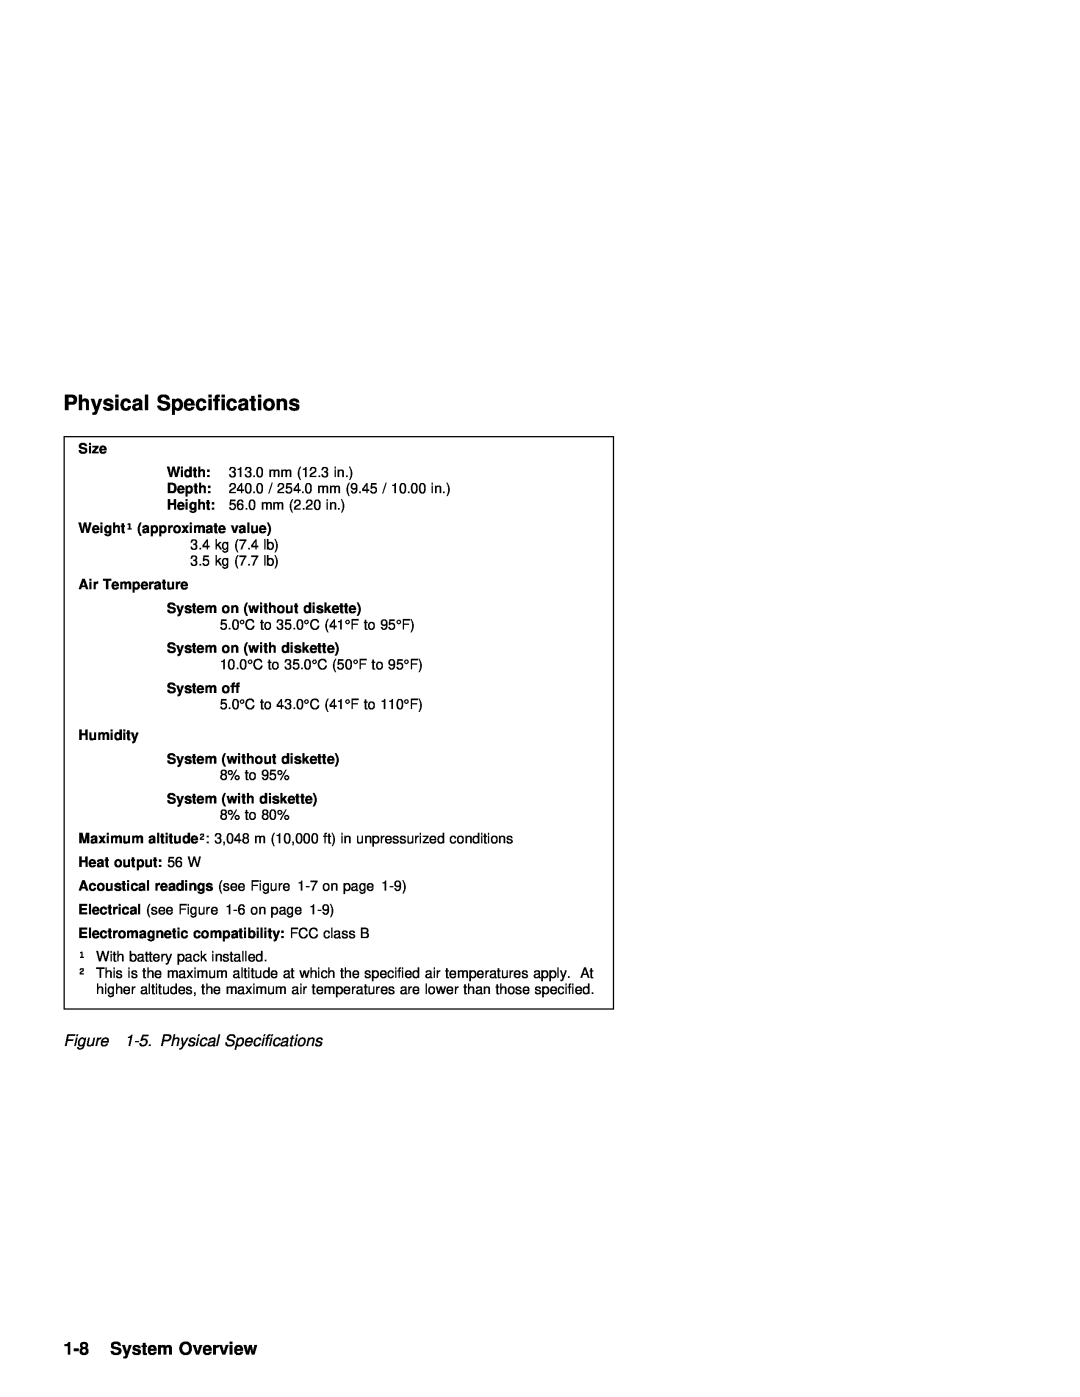 IBM 770 manual Physical Specifications, System Overview 